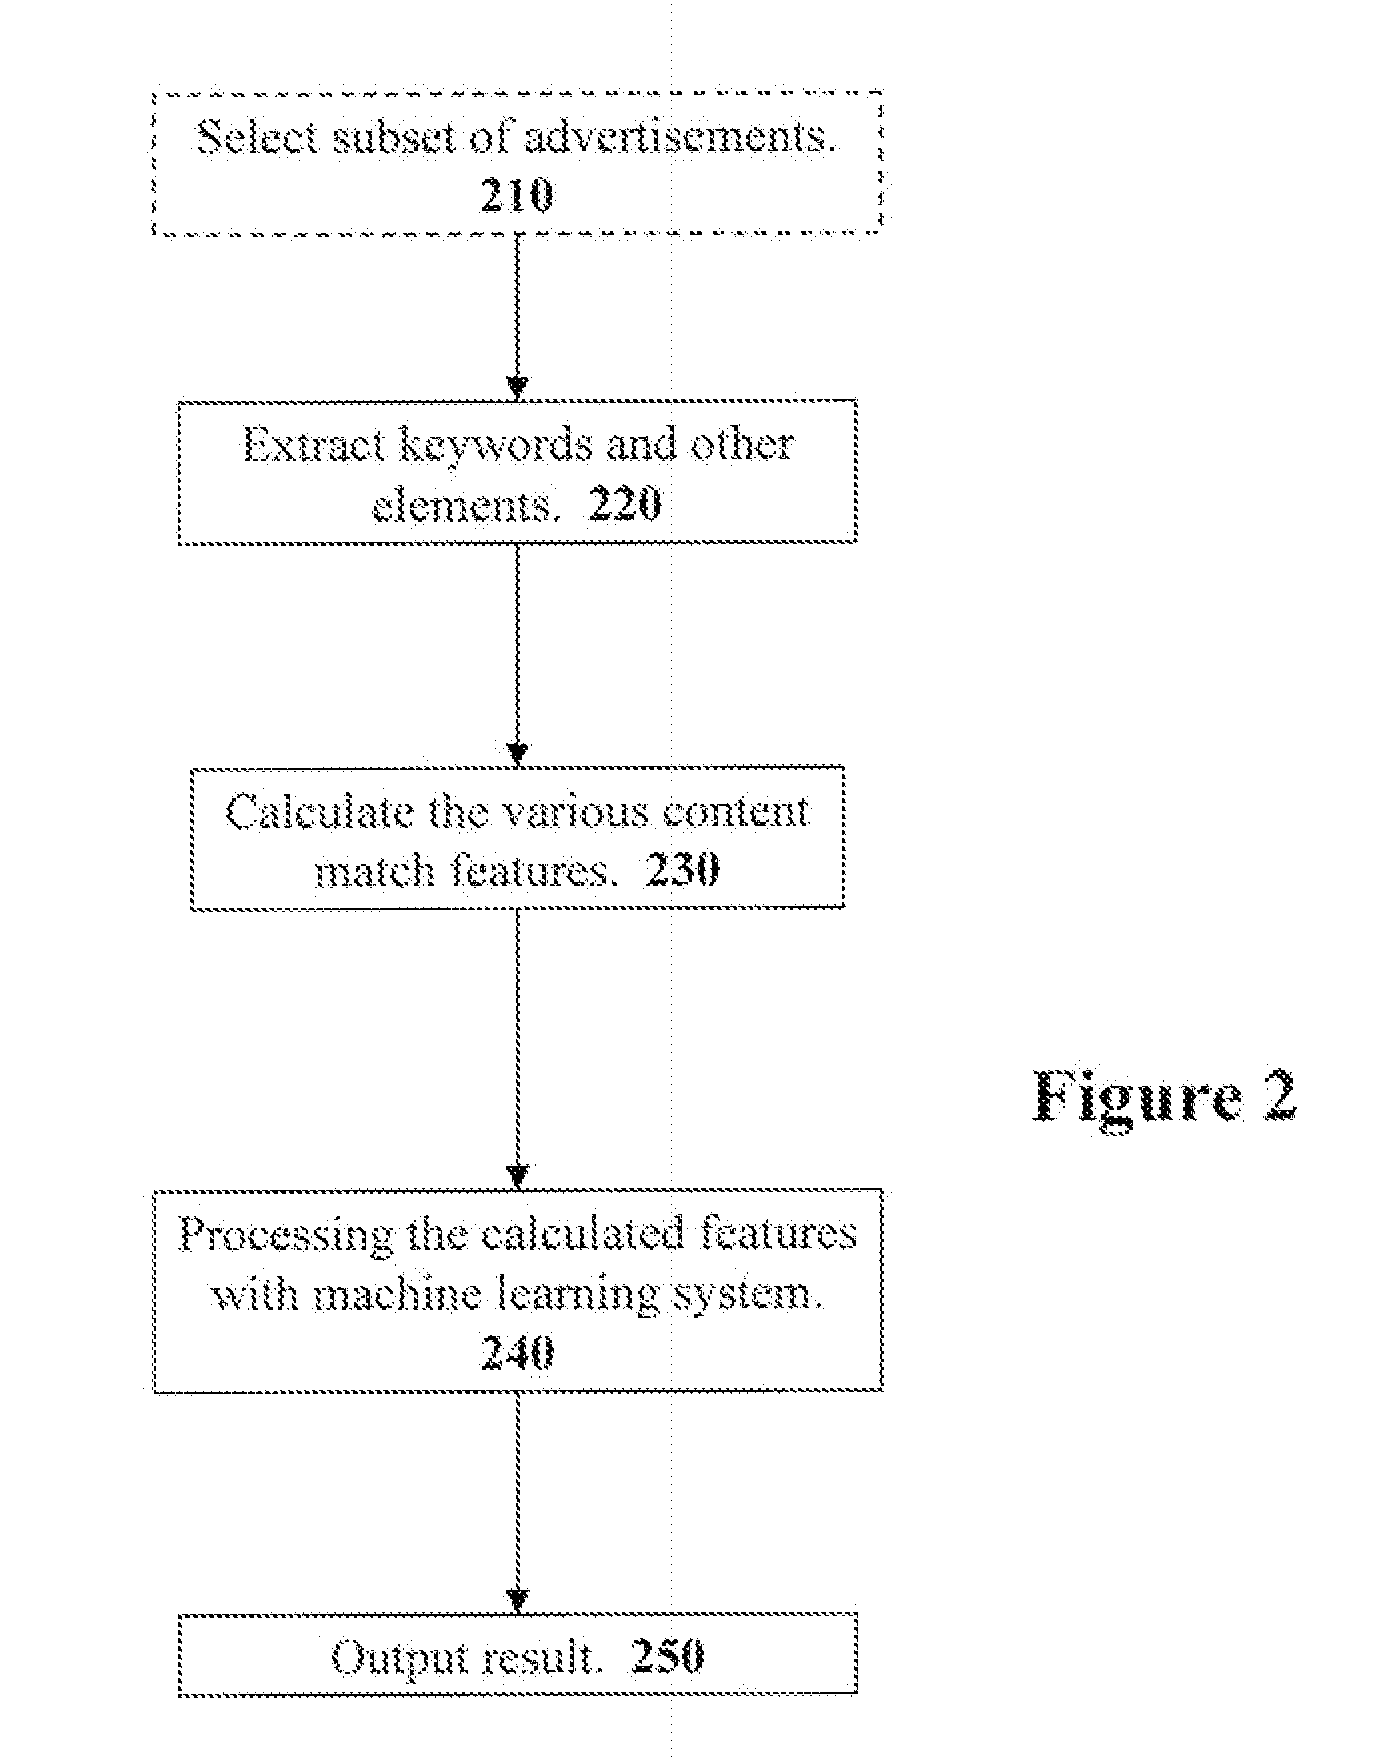 Method For Matching Electronic Advertisements To Surrounding Context Based On Their Advertisement Content